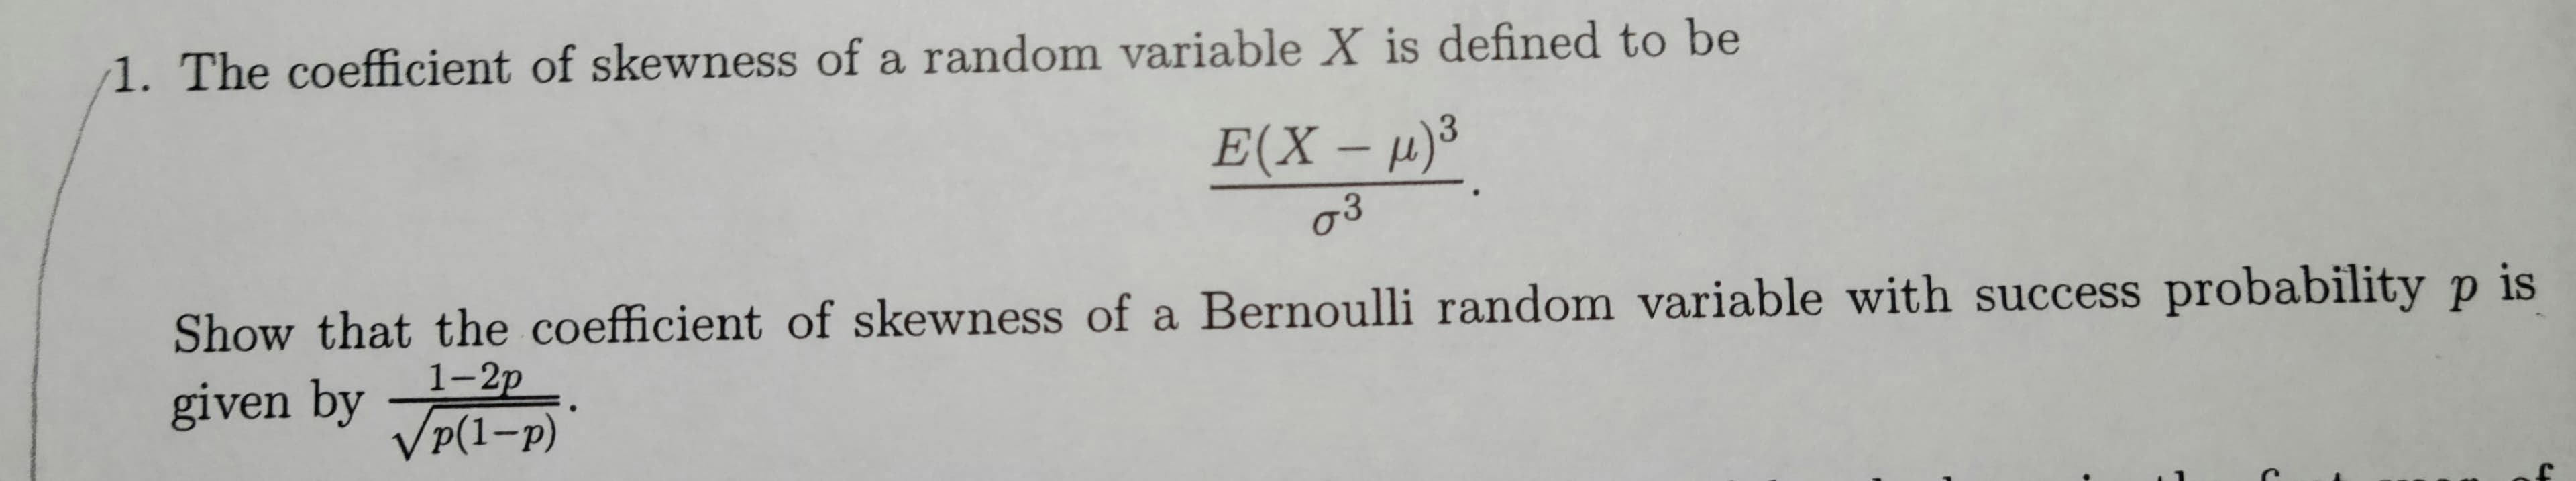 1. The coefficient of skewness of a random variable X is defined to be
3
E(X -μ) ³
03
Show that the coefficient of skewness of a Bernoulli random variable with success probability p is
given by 1-2p
√p(1-P)